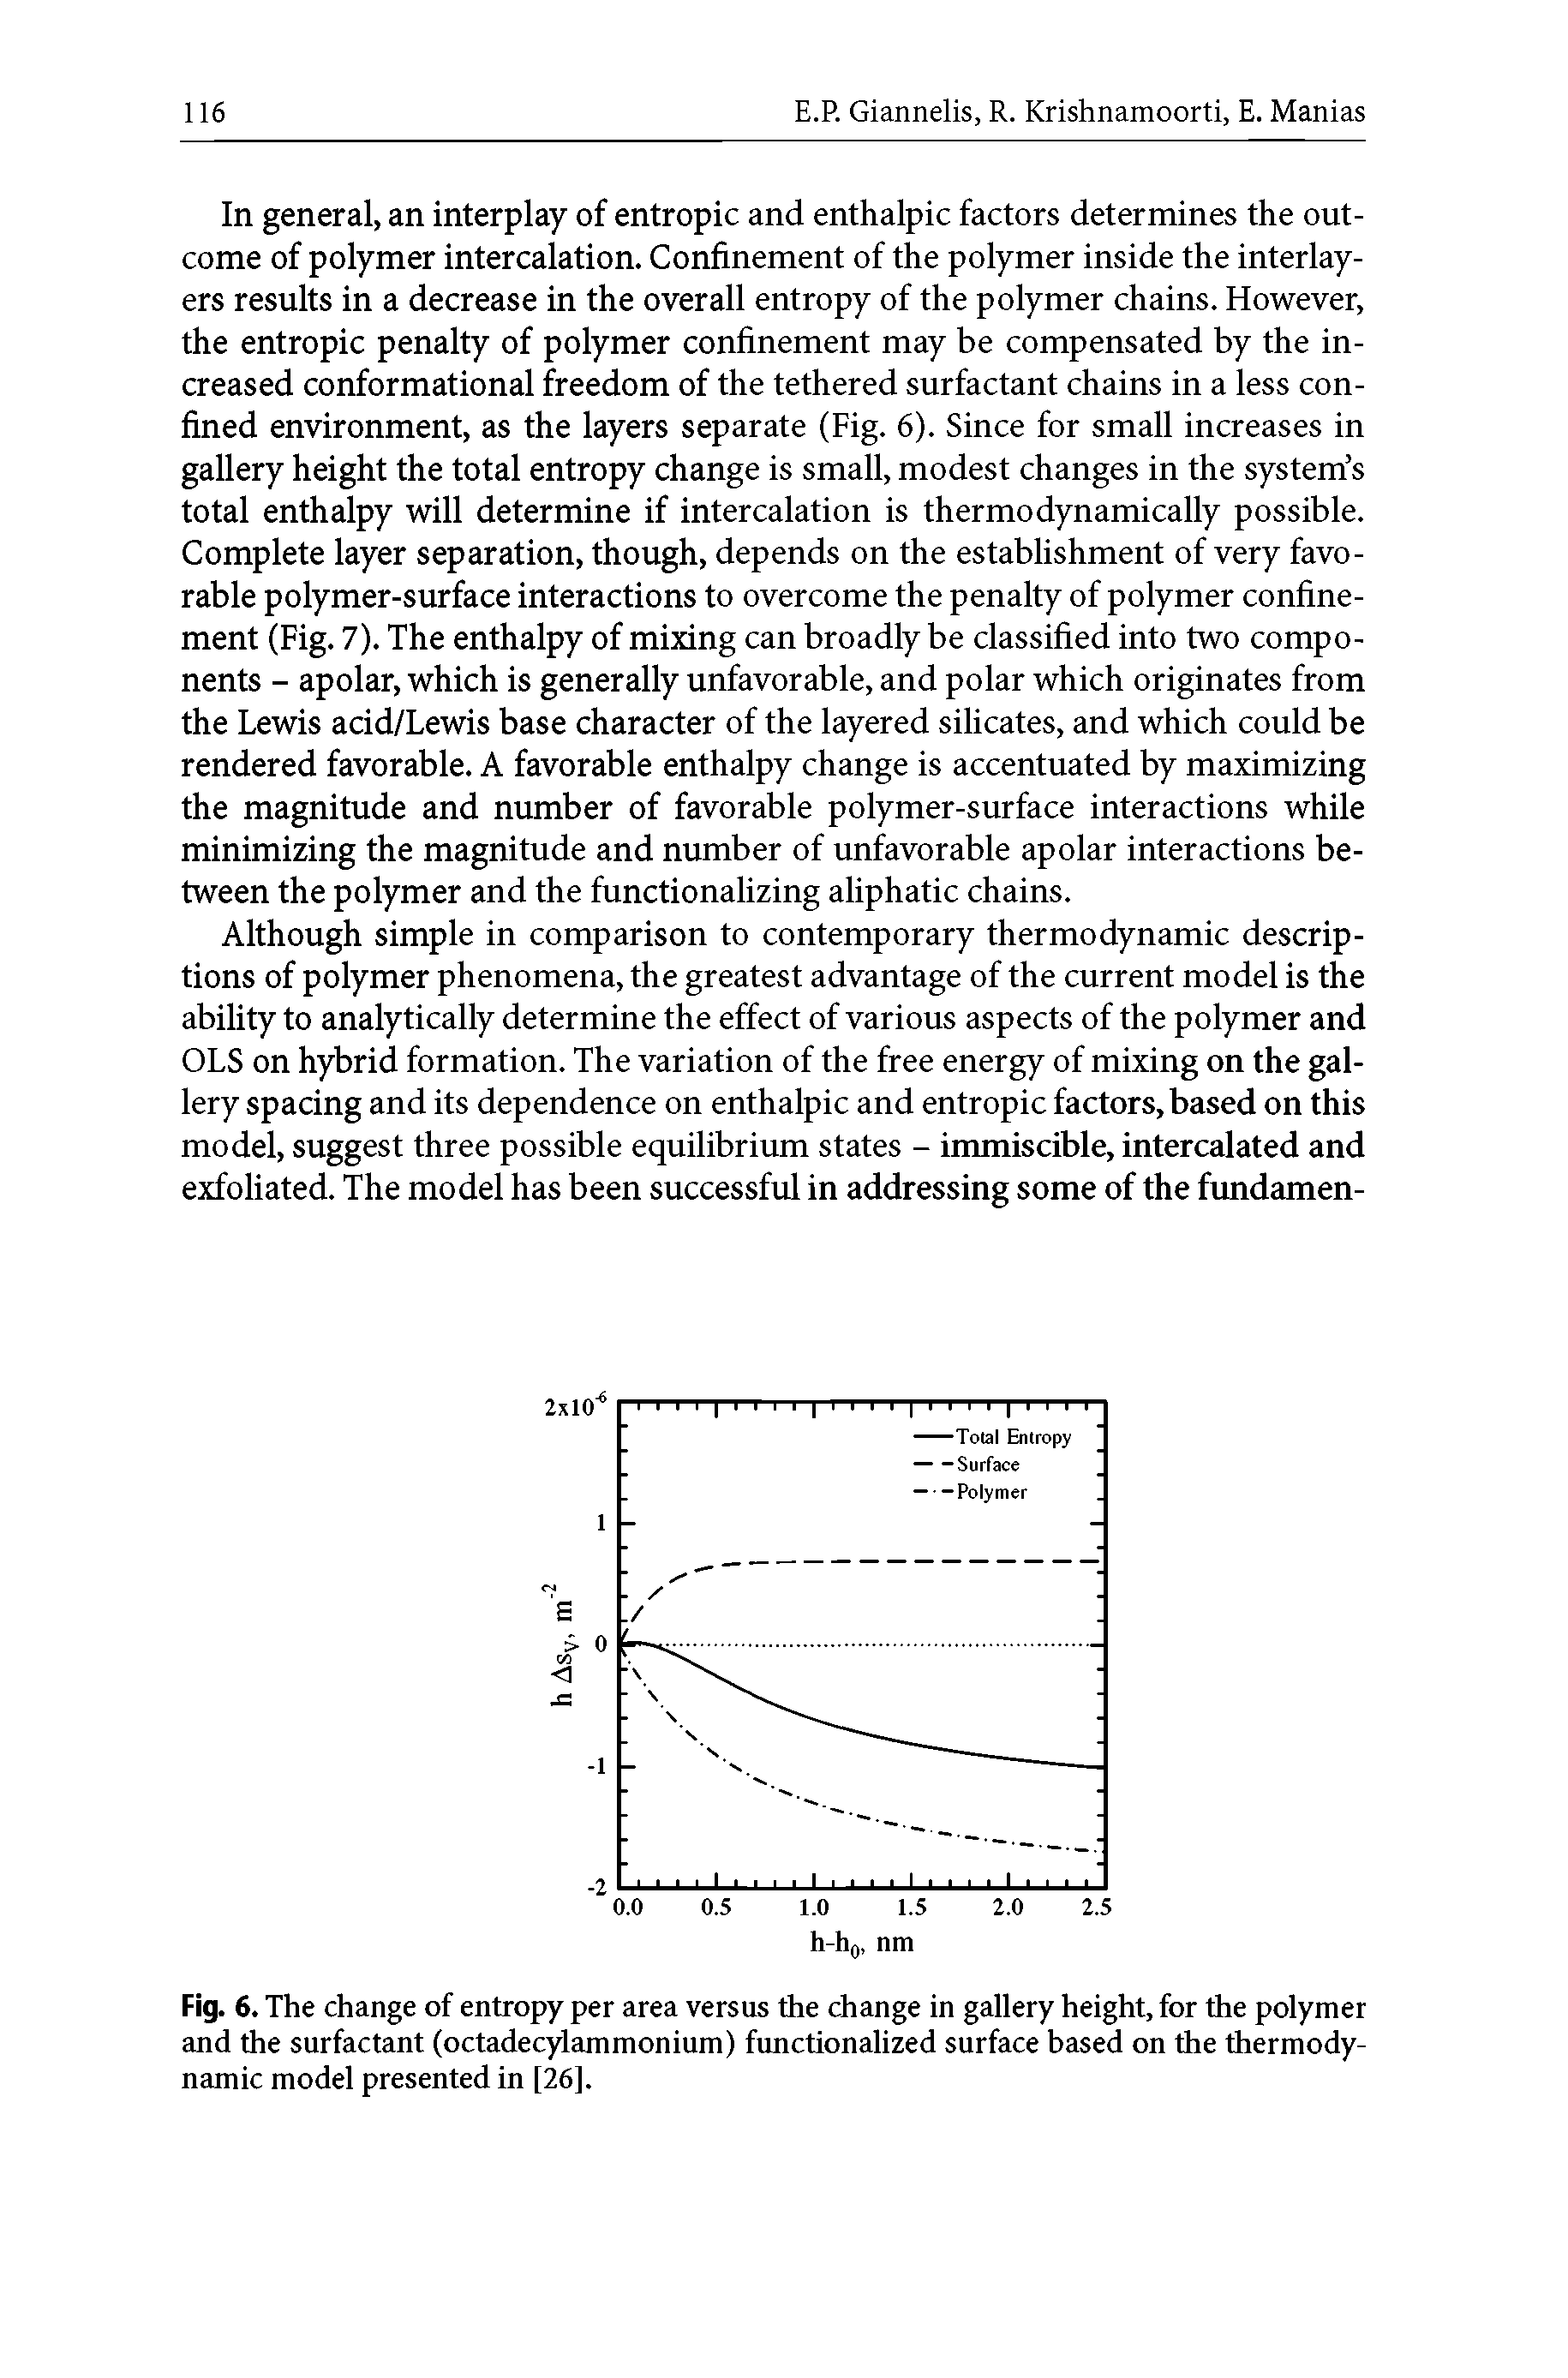 Fig. 6. The change of entropy per area versus the change in gallery height, for the polymer and the surfactant (octadecylammonium) functionalized surface based on the thermodynamic model presented in [26].